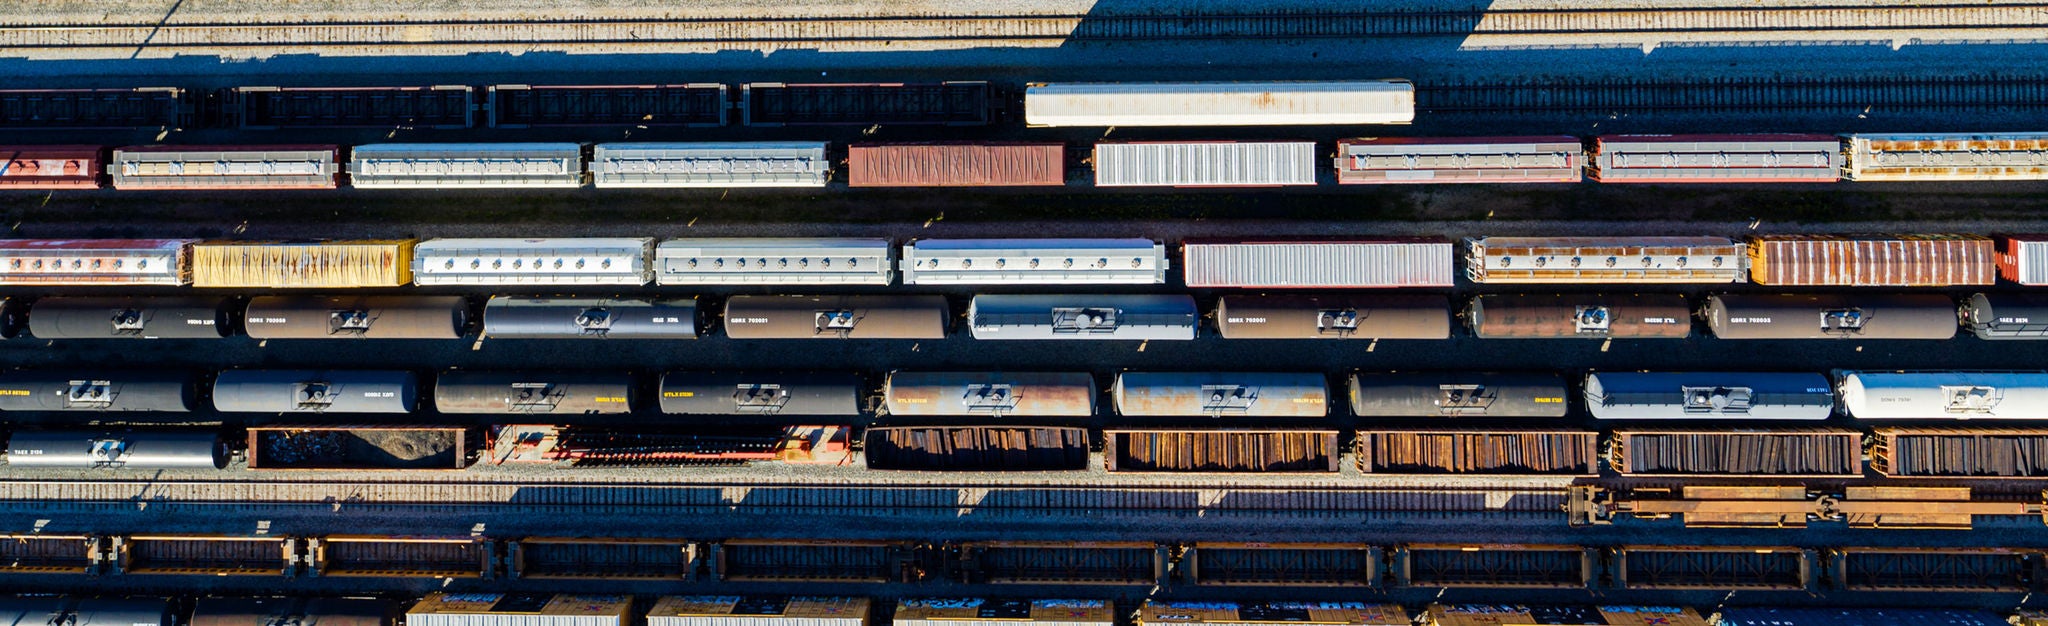 Rail cars of different types in a train yard